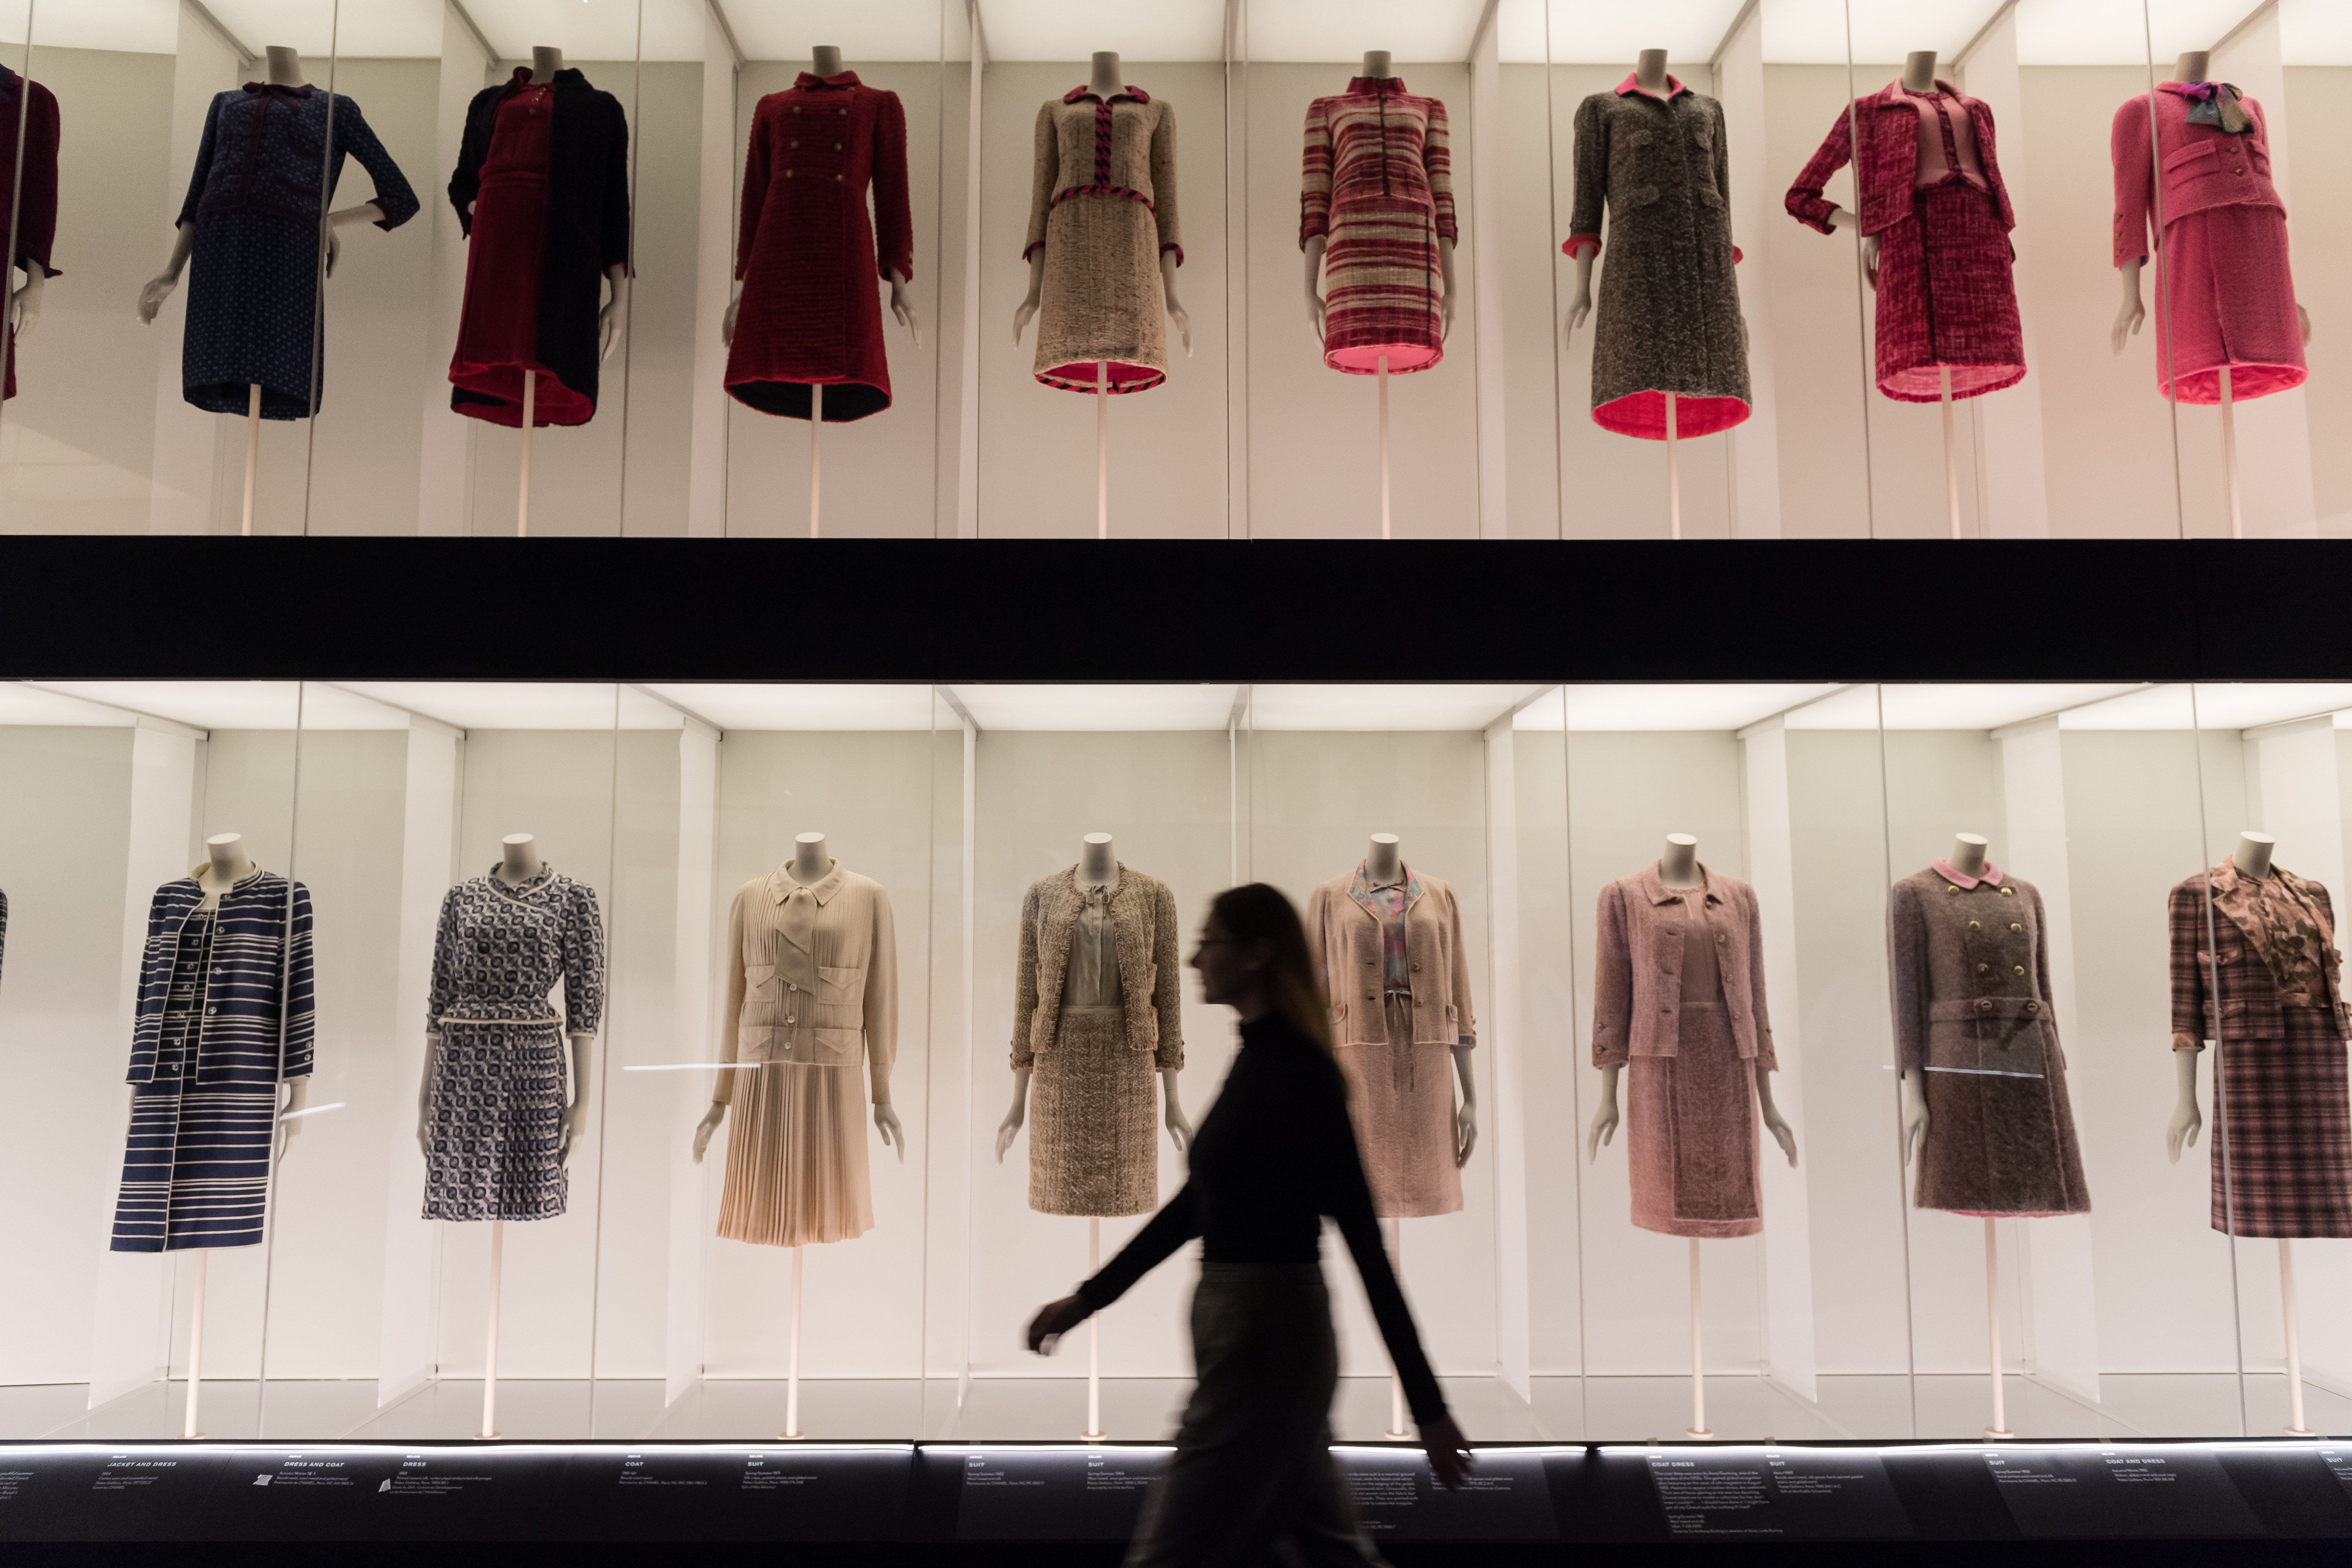 A Major Chanel Exhibition Is Coming To London's V&A Museum